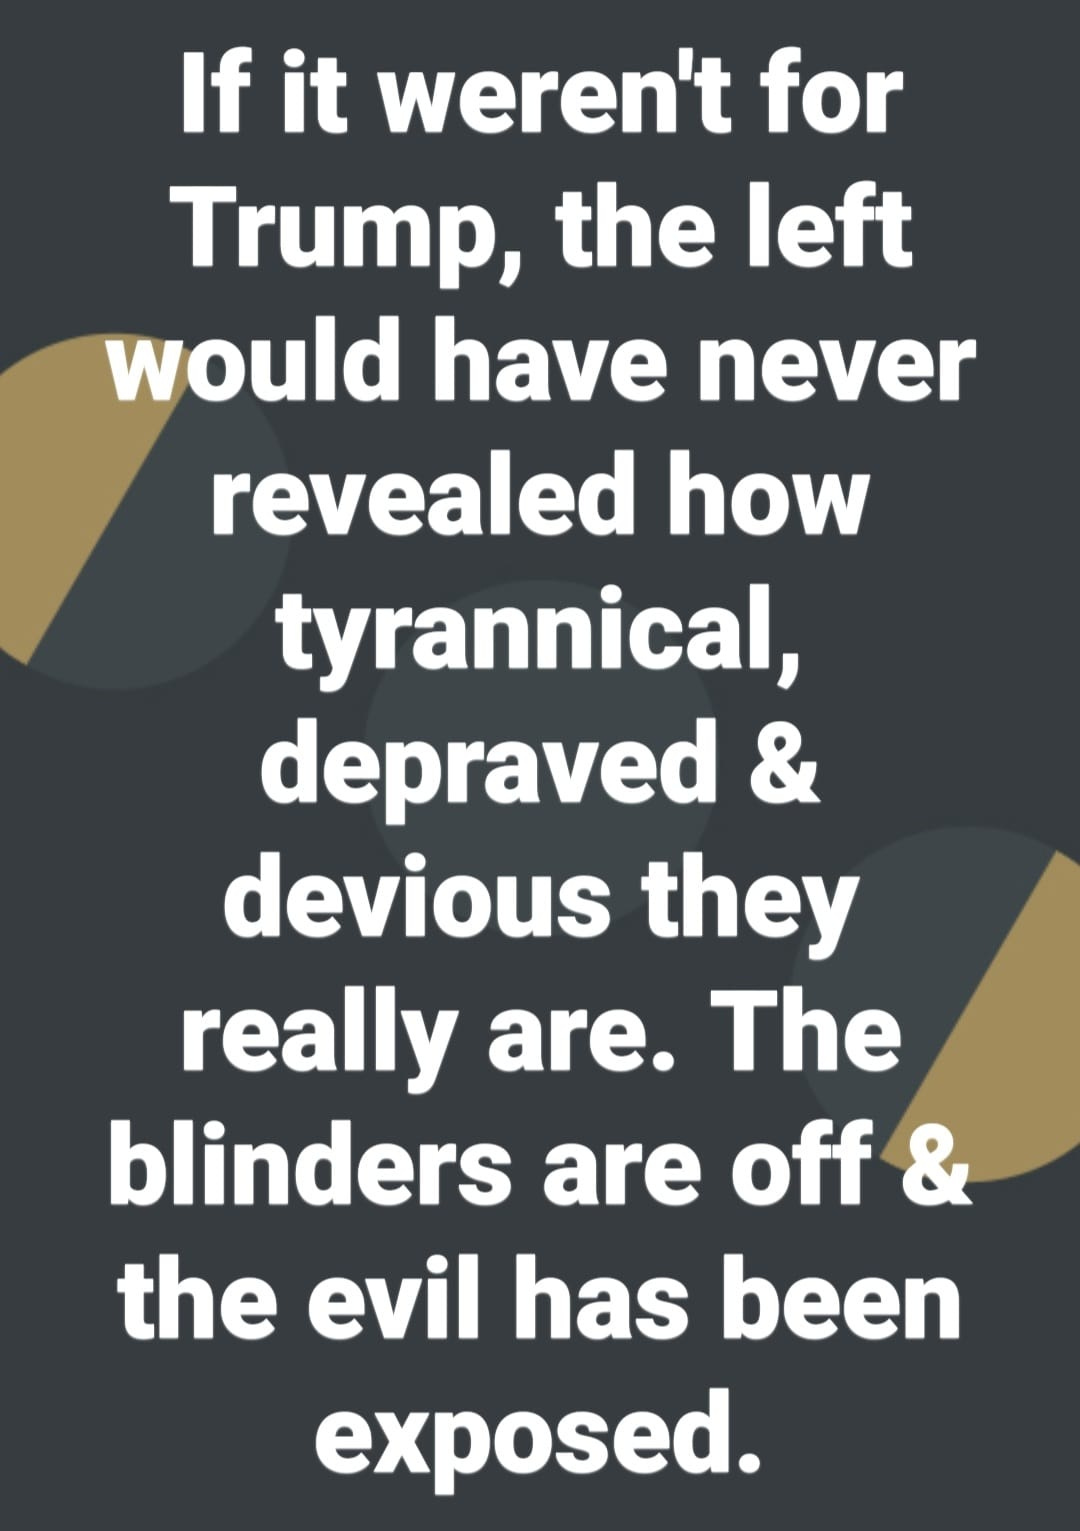 May be an image of text that says 'If it weren't for Trump, the left would have never revealed how tyrannical, depraved & devious they really are. The blinders are off & the evil has been exposed.'